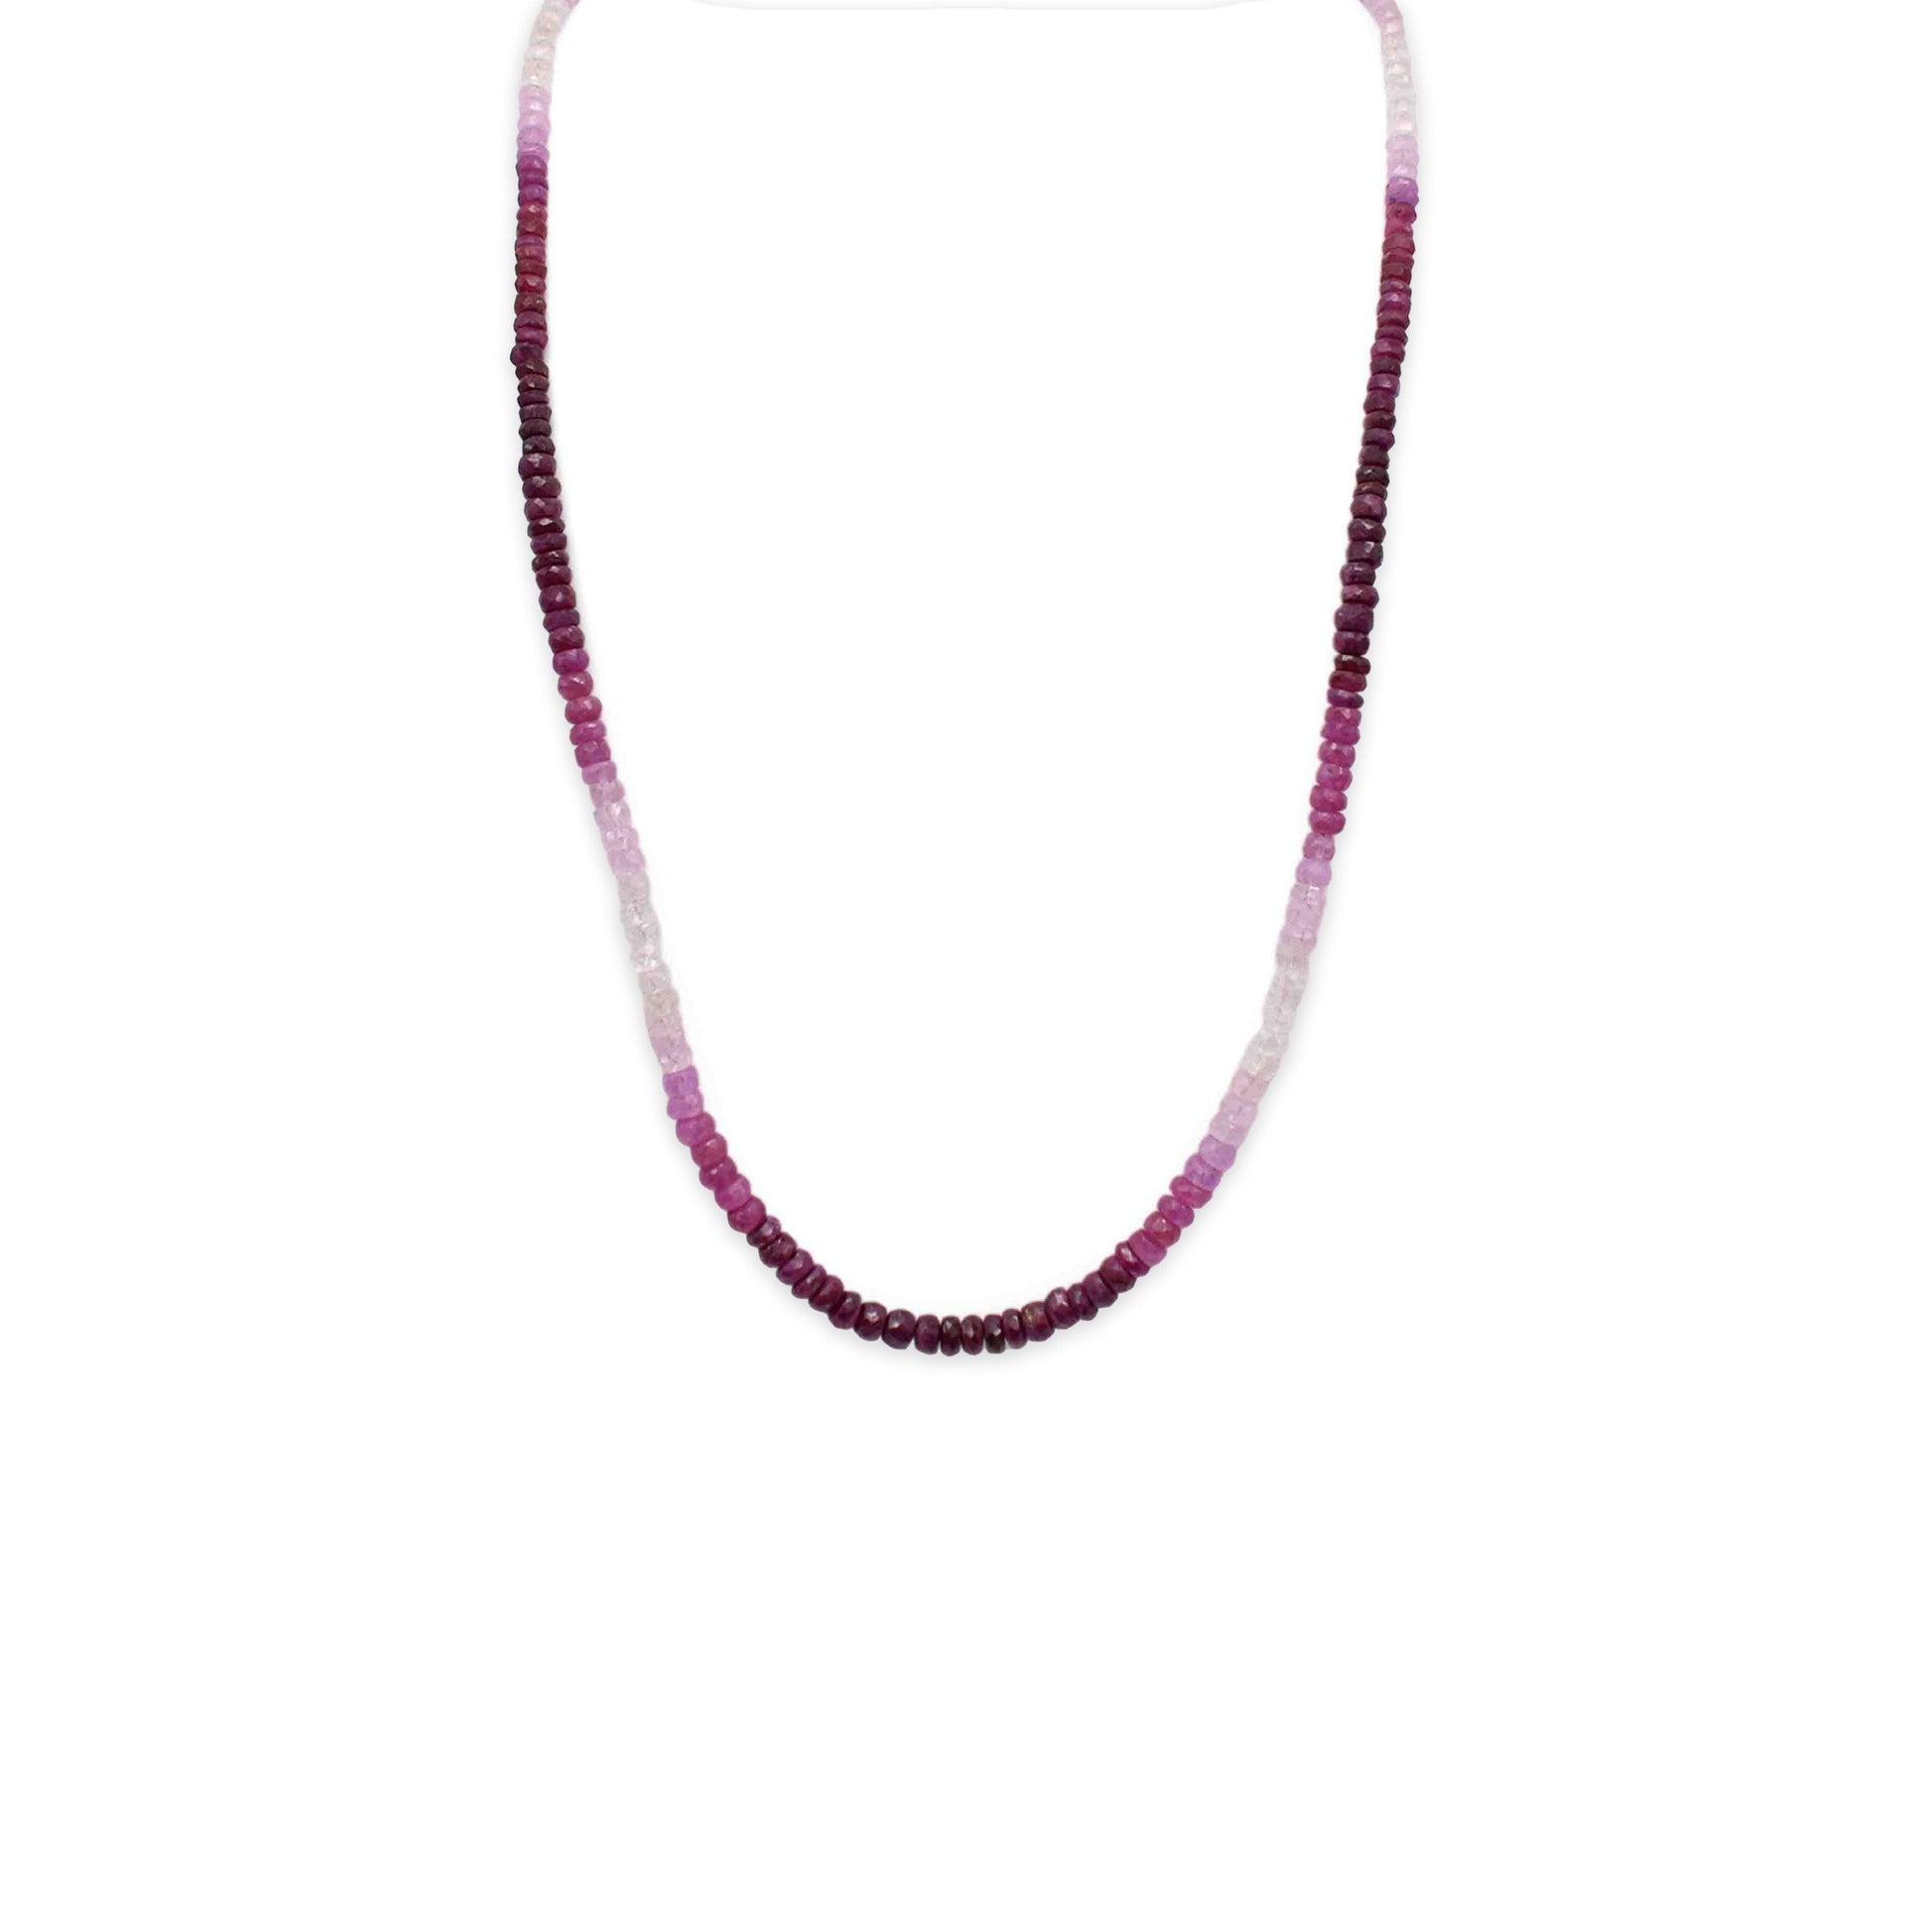 Shaded Ruby Faceted Cut Stone Necklace - Mystic Gleam